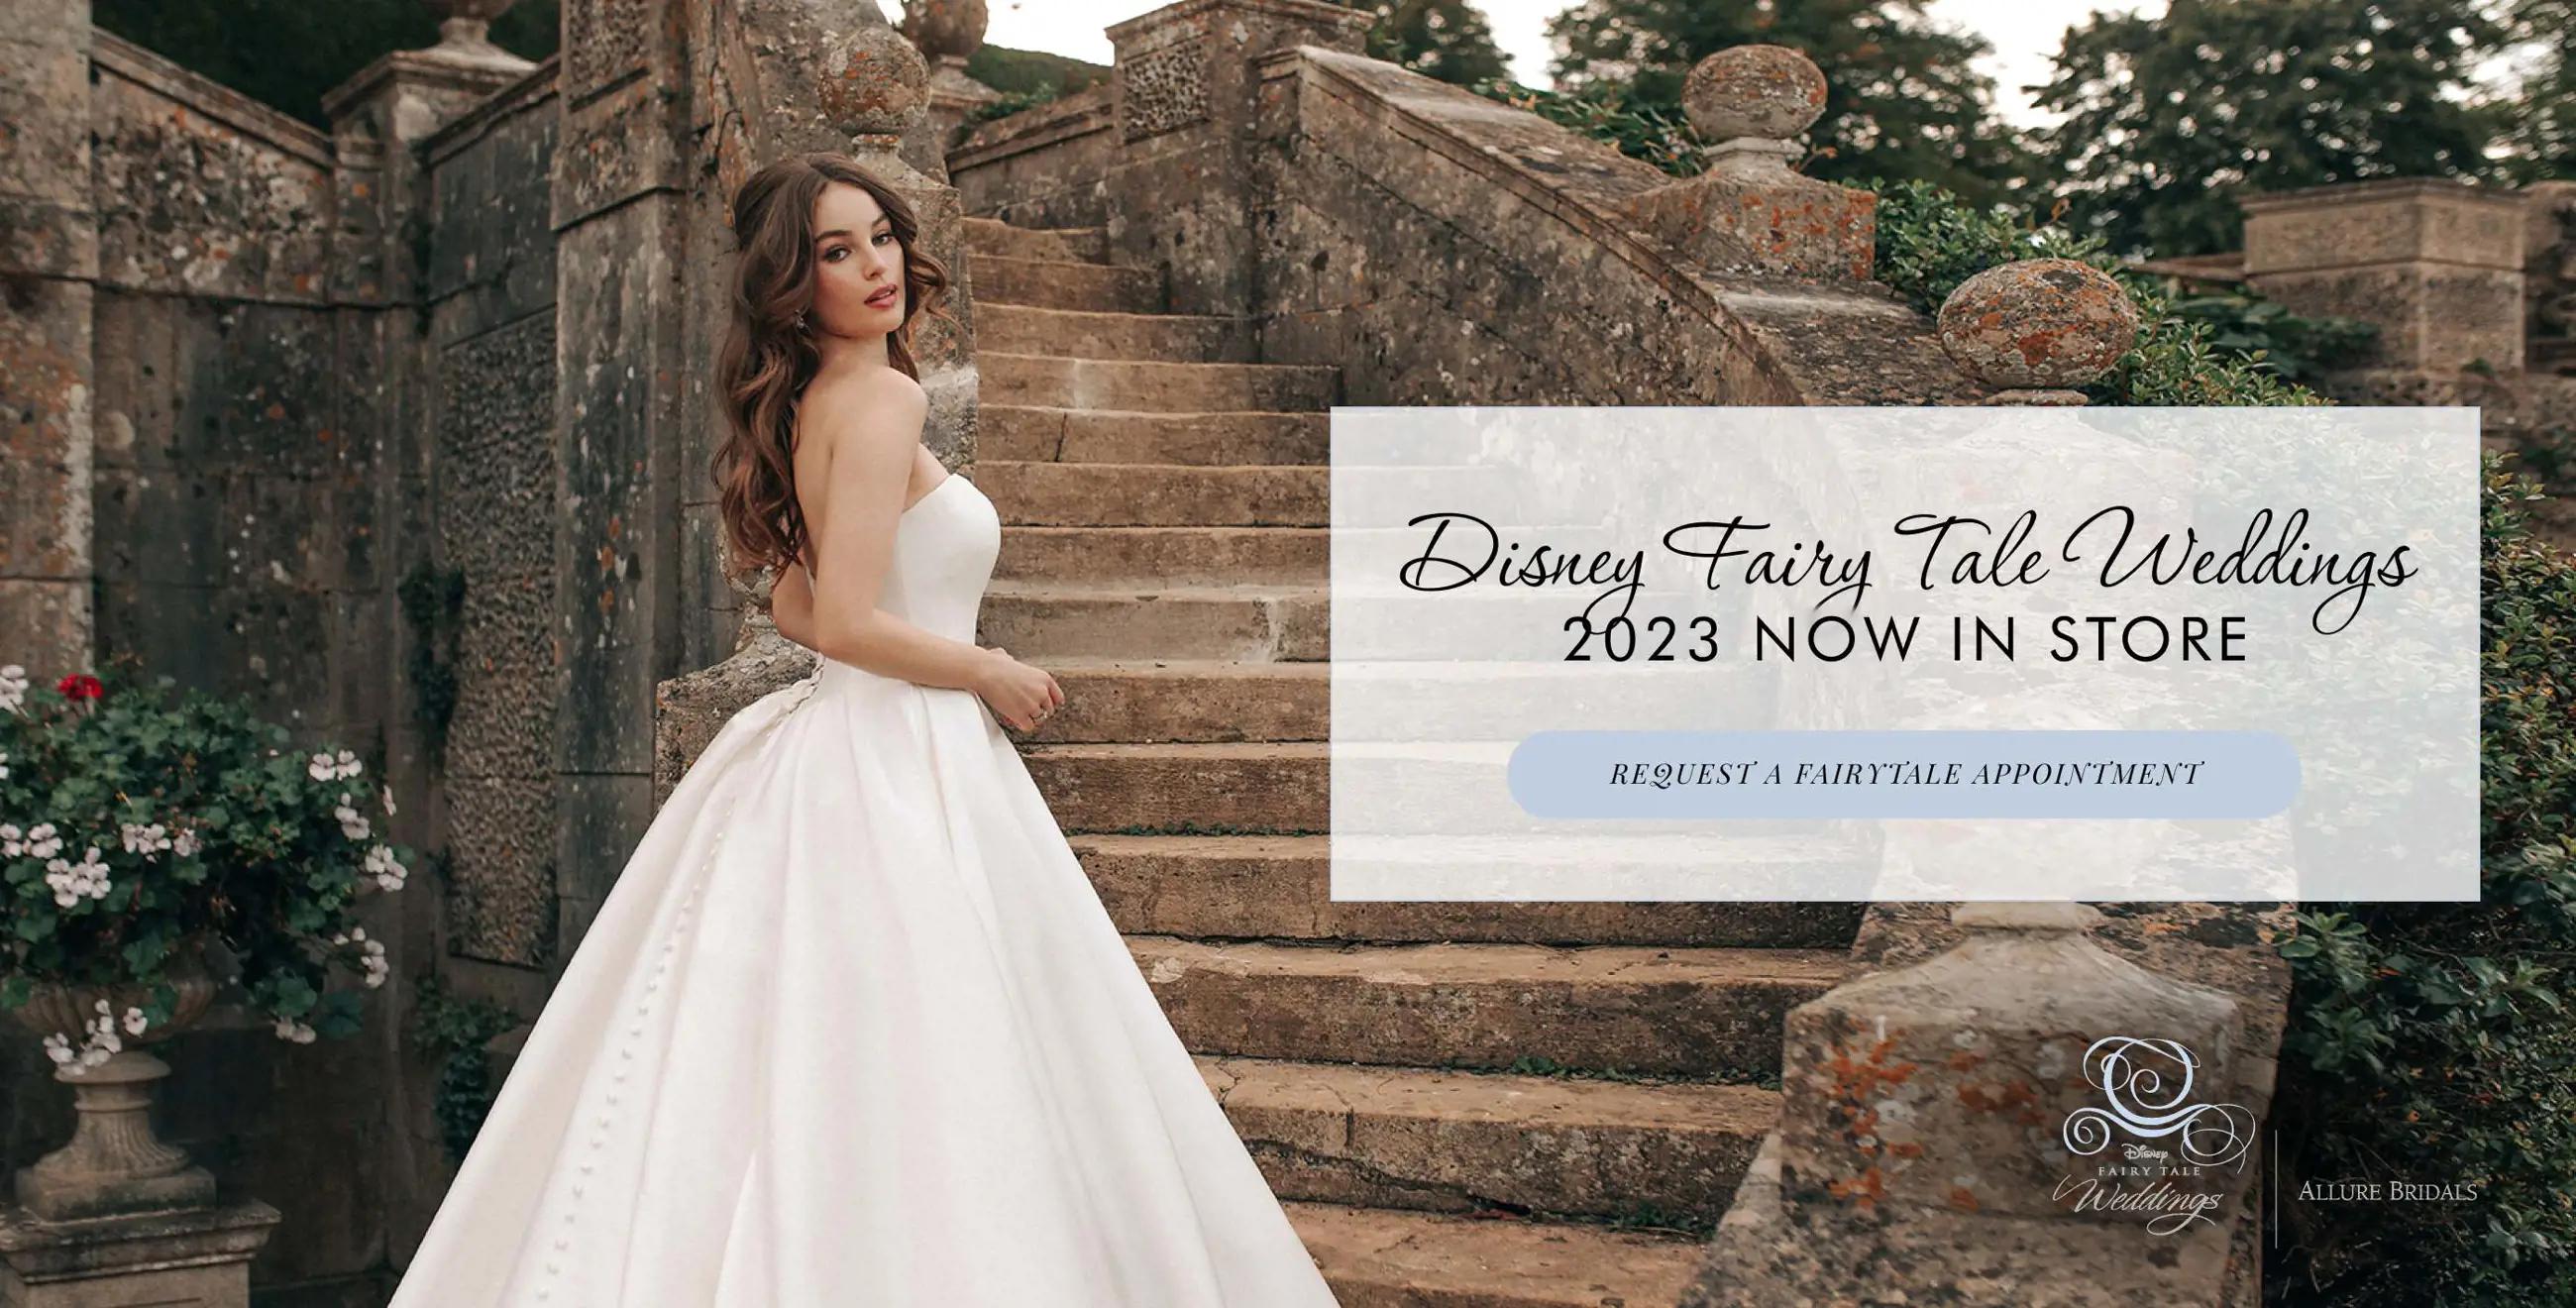 February 10th Disney Fairy Tale Weddings_Request Your FairyTale Appointment